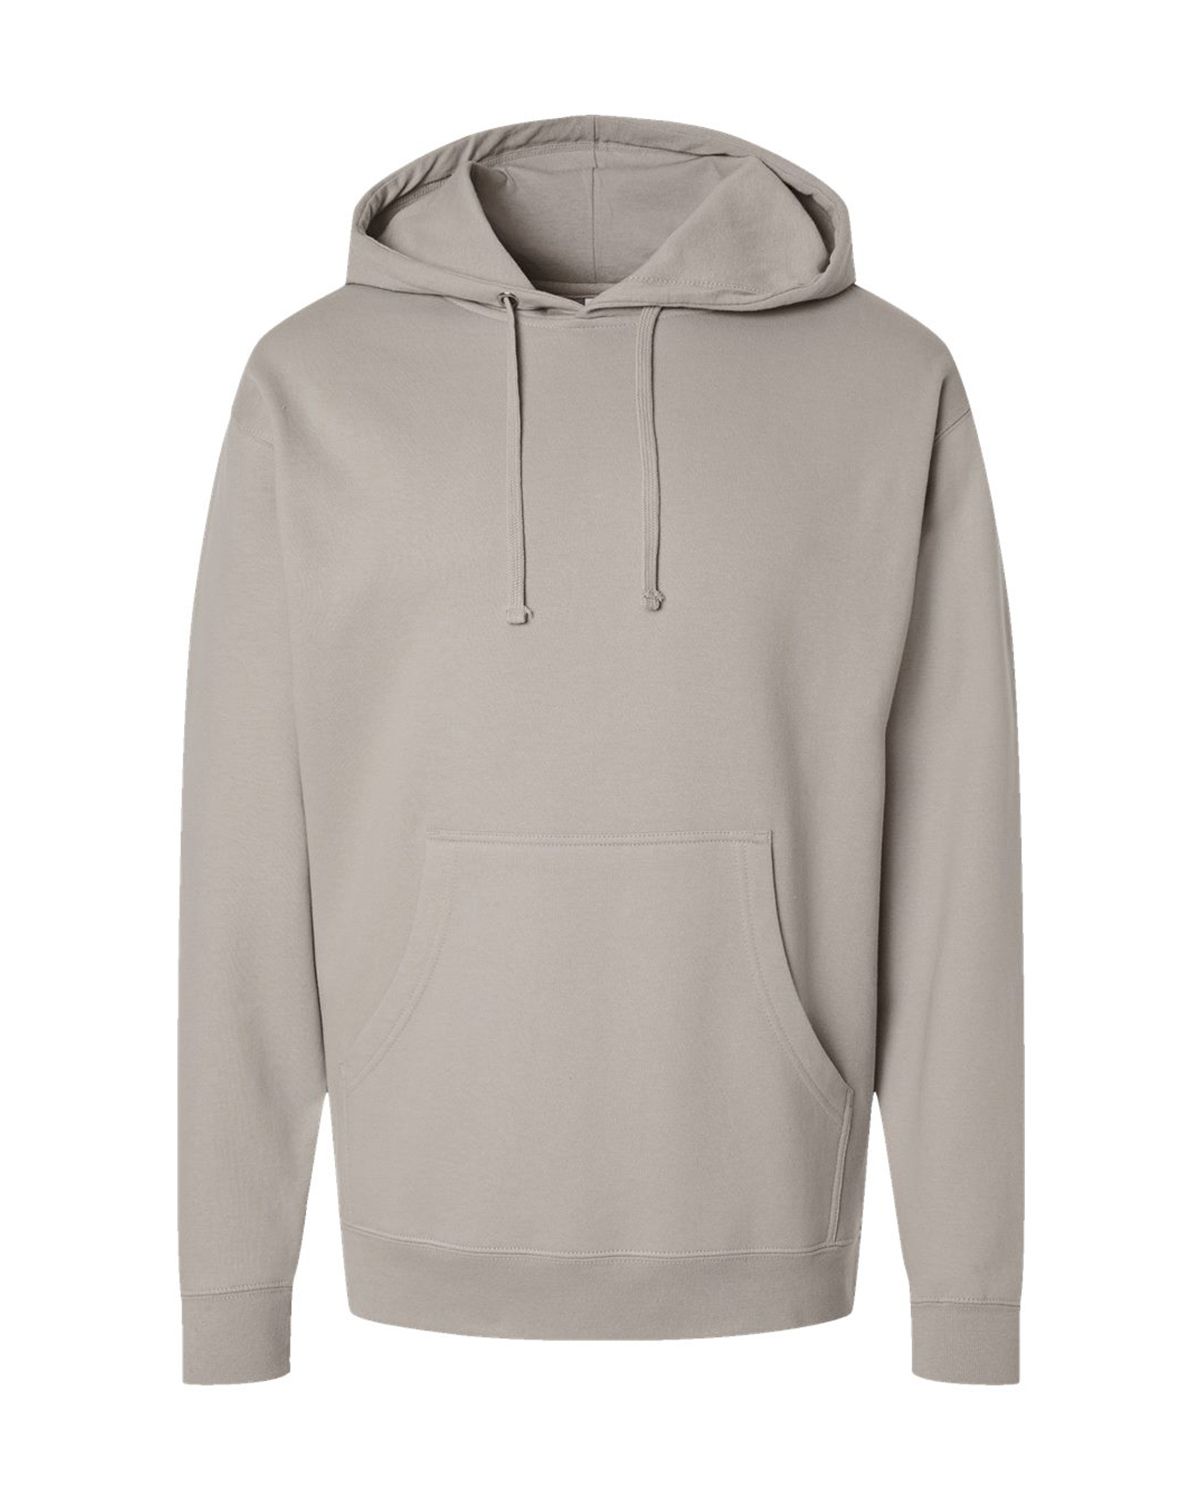 Independent Trading Co. SS4500 Hooded Pullover Sweatshirt